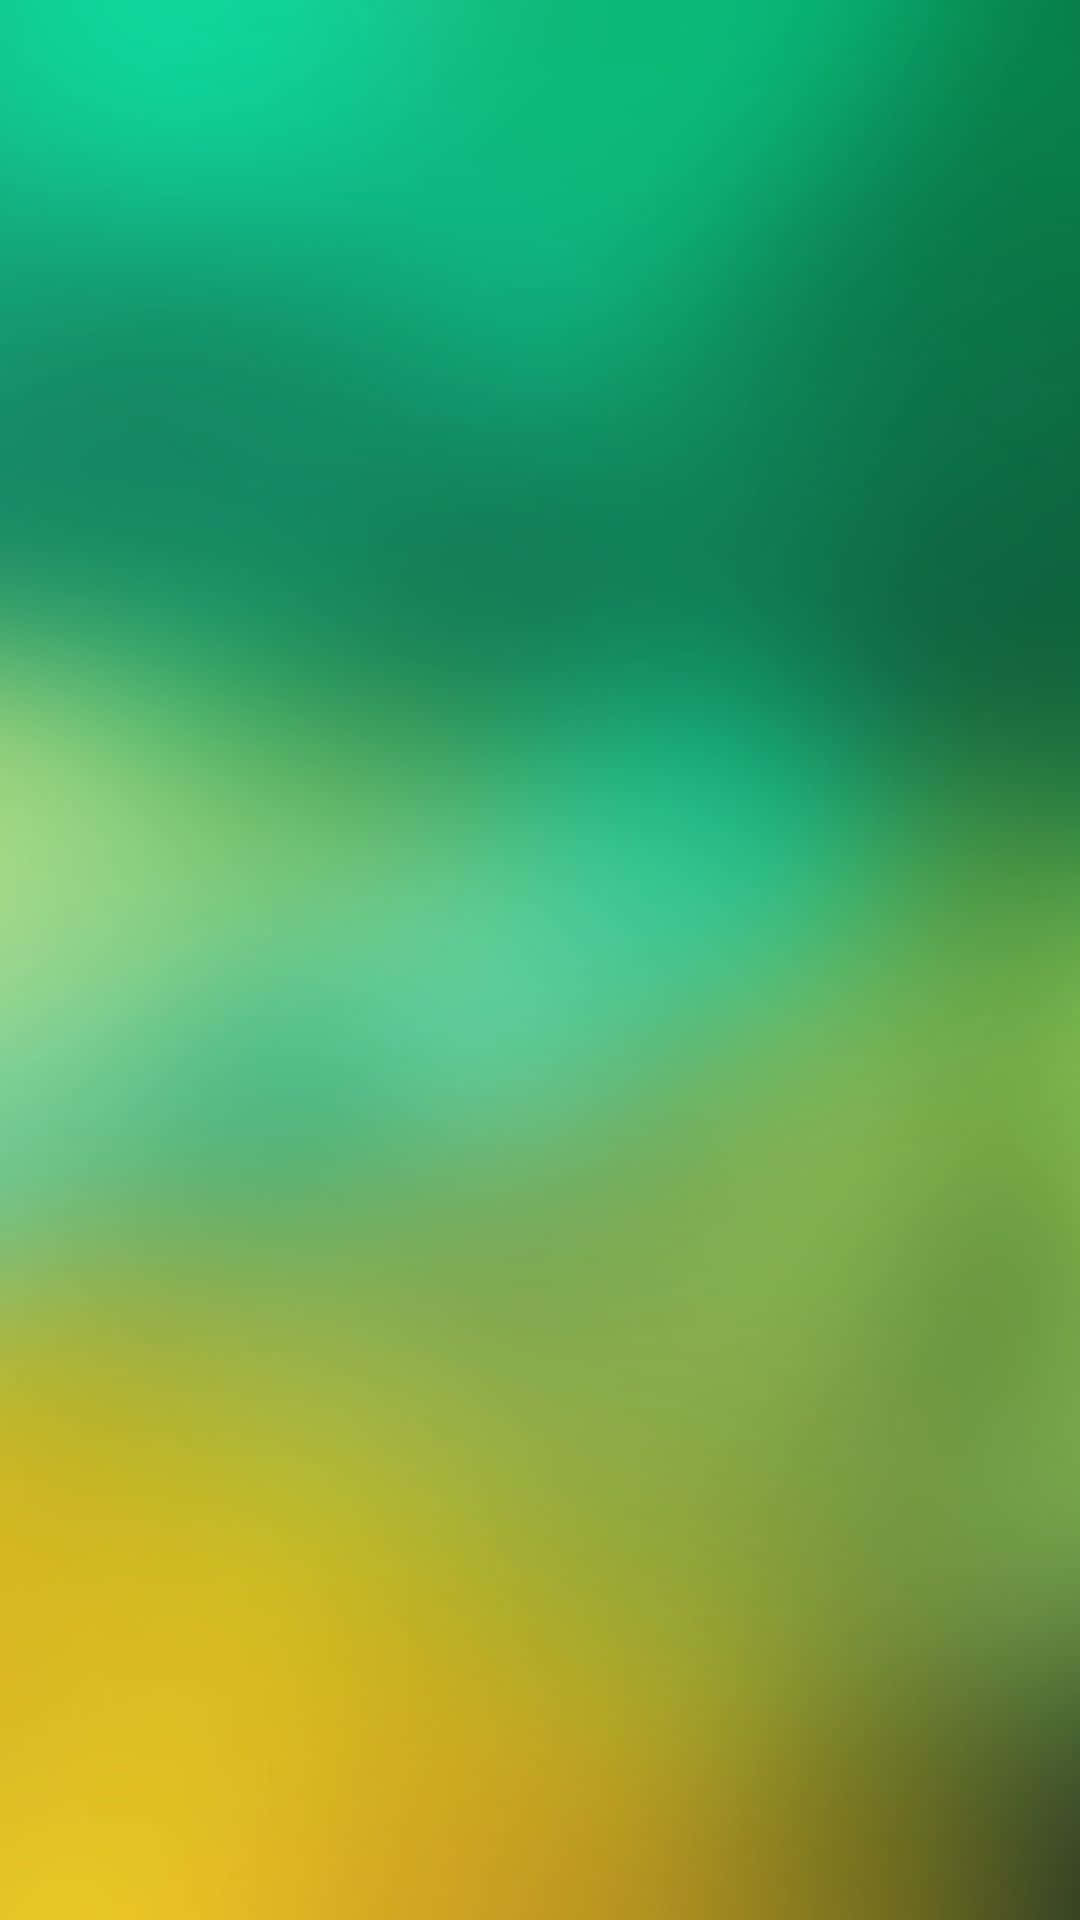 A Green And Yellow Blurred Background